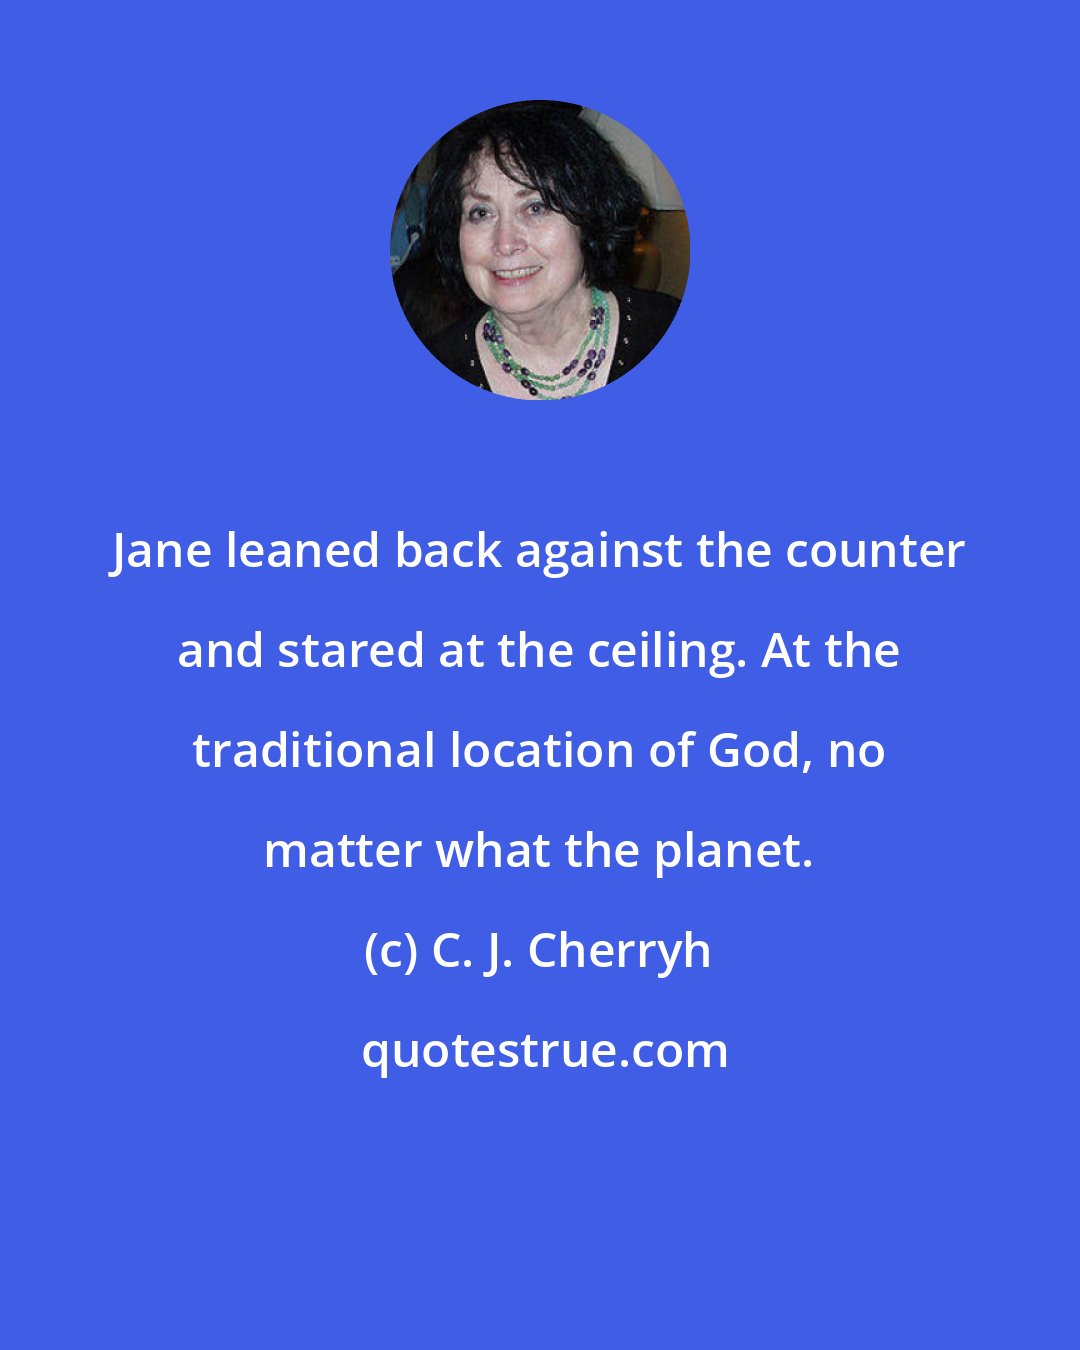 C. J. Cherryh: Jane leaned back against the counter and stared at the ceiling. At the traditional location of God, no matter what the planet.